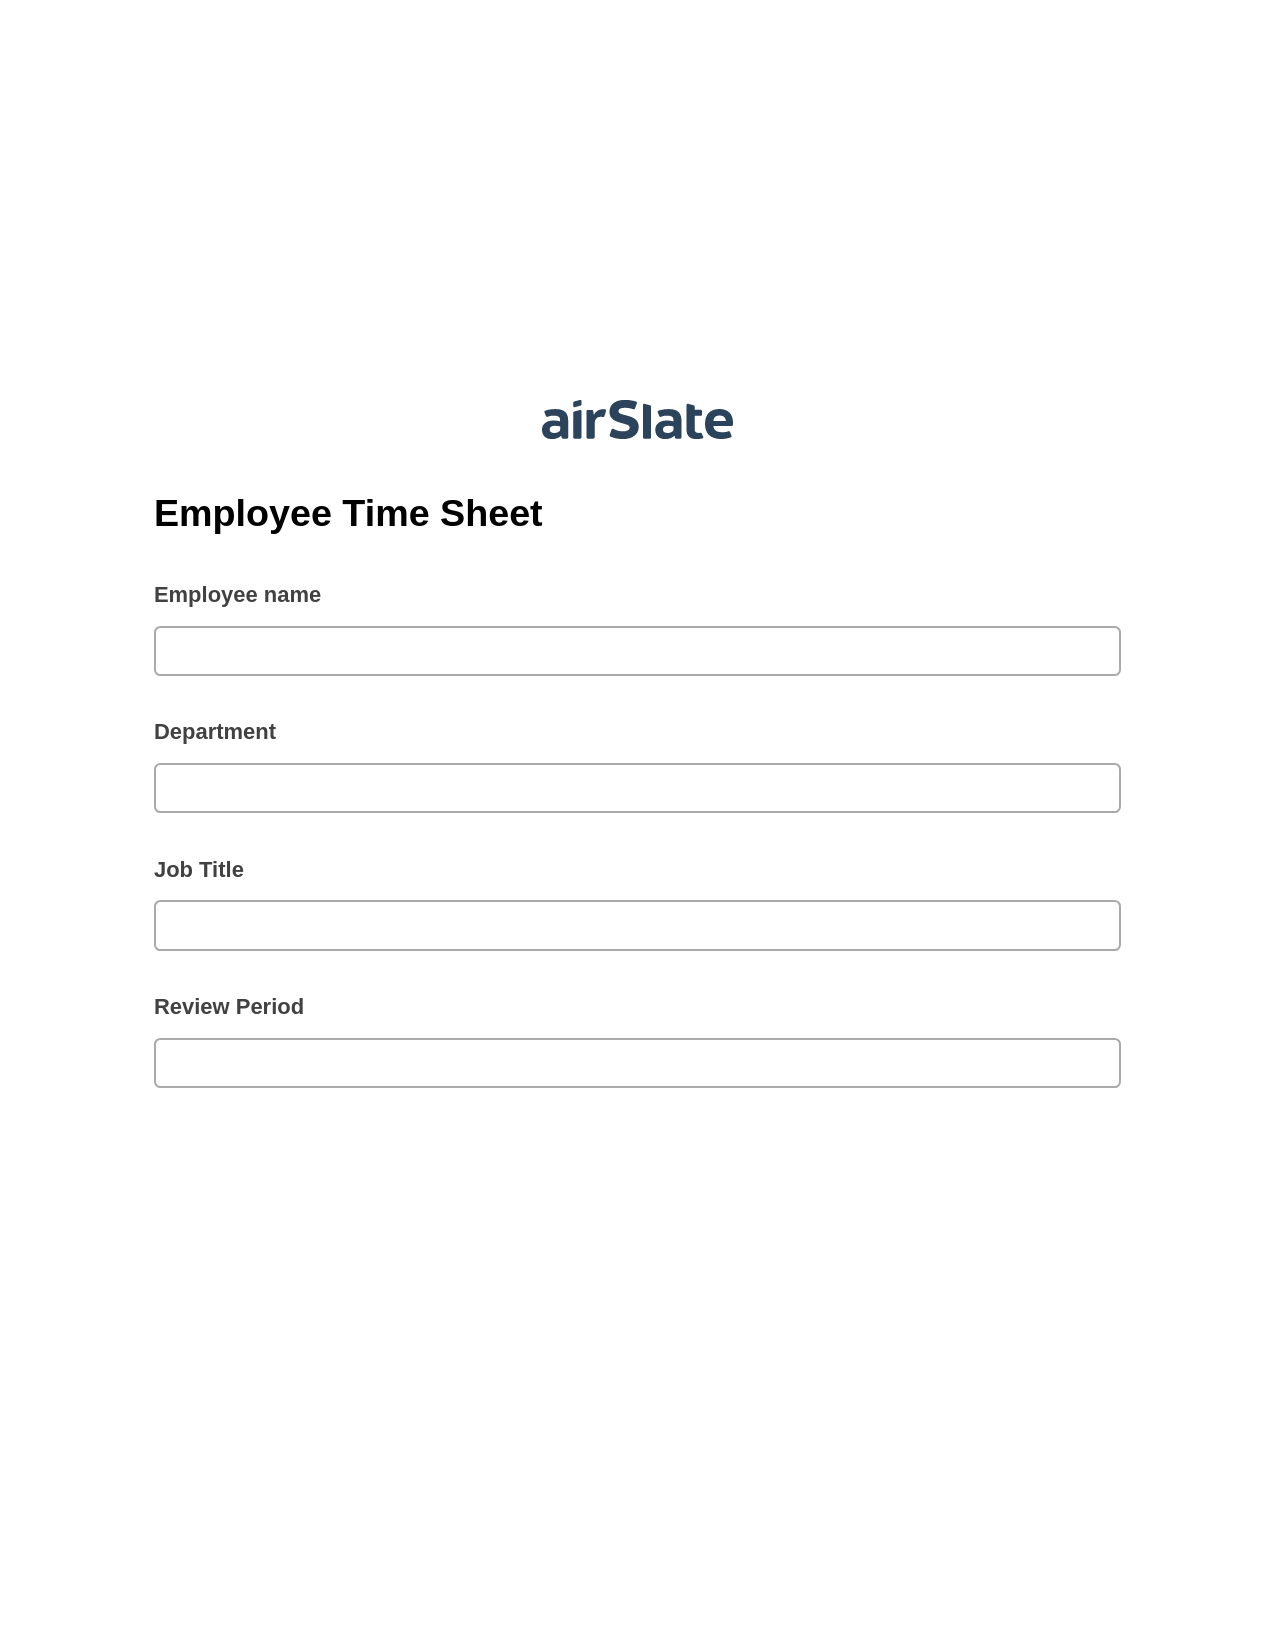 Multirole Employee Time Sheet Pre-fill Dropdowns from CSV file Bot, Update Audit Trail Bot, Post-finish Document Bot